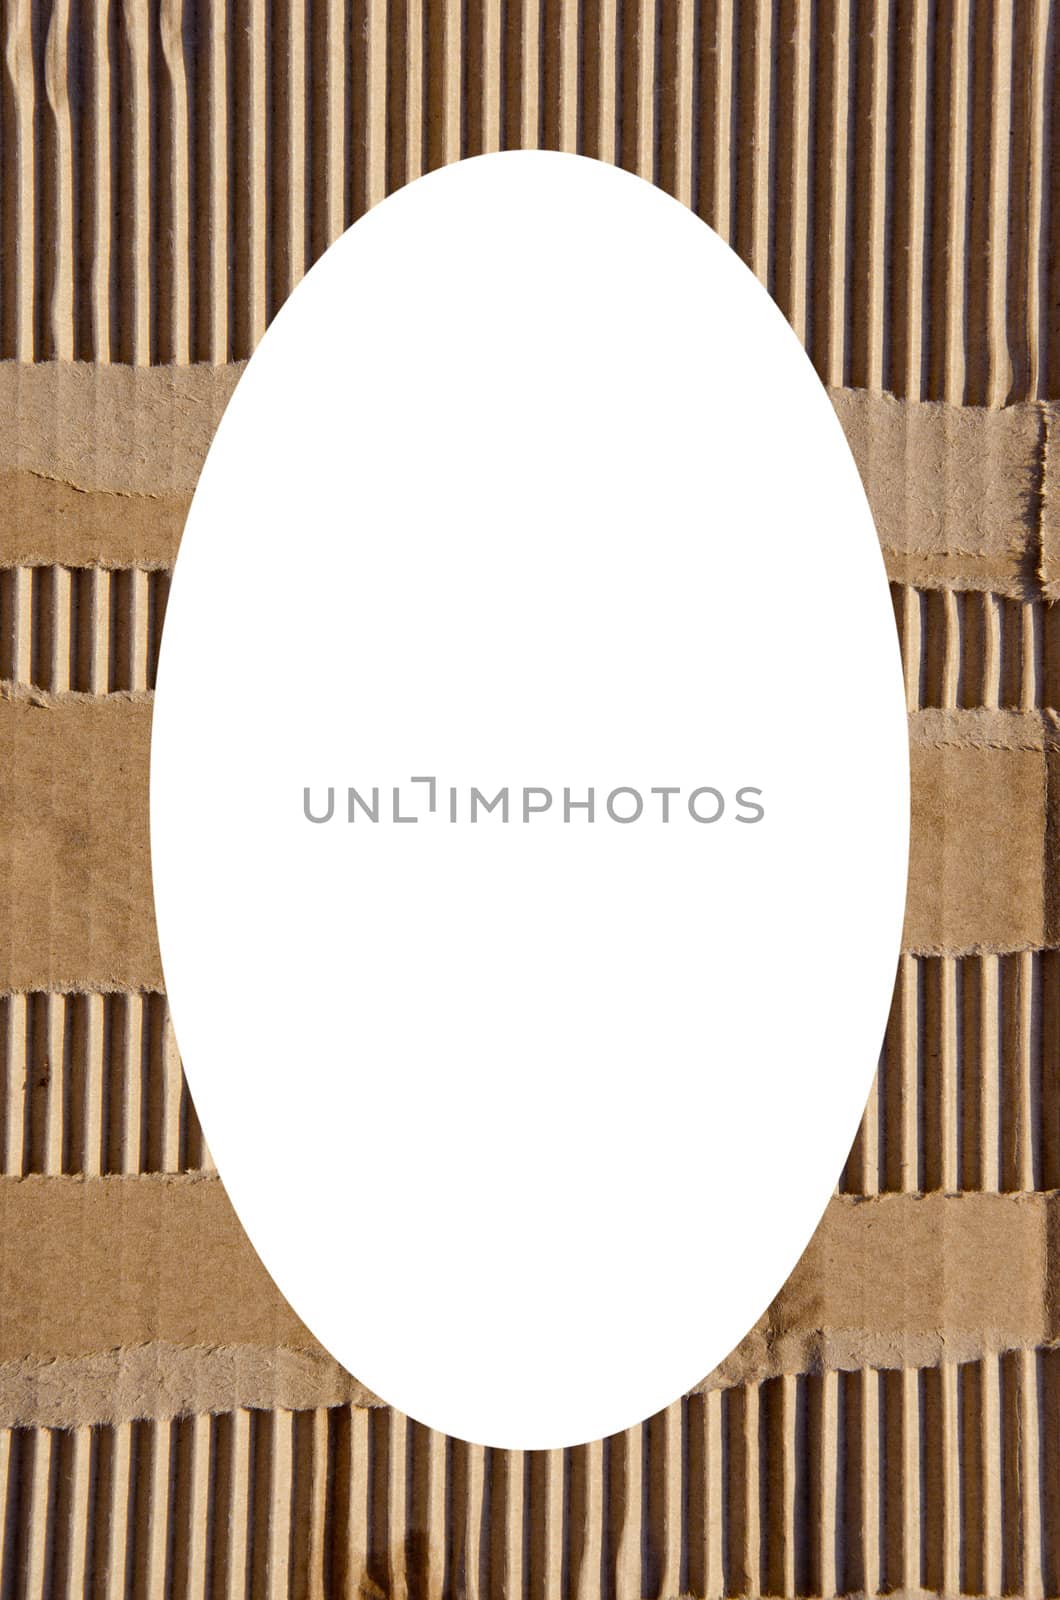 Packing box wall and white oval in center by sauletas